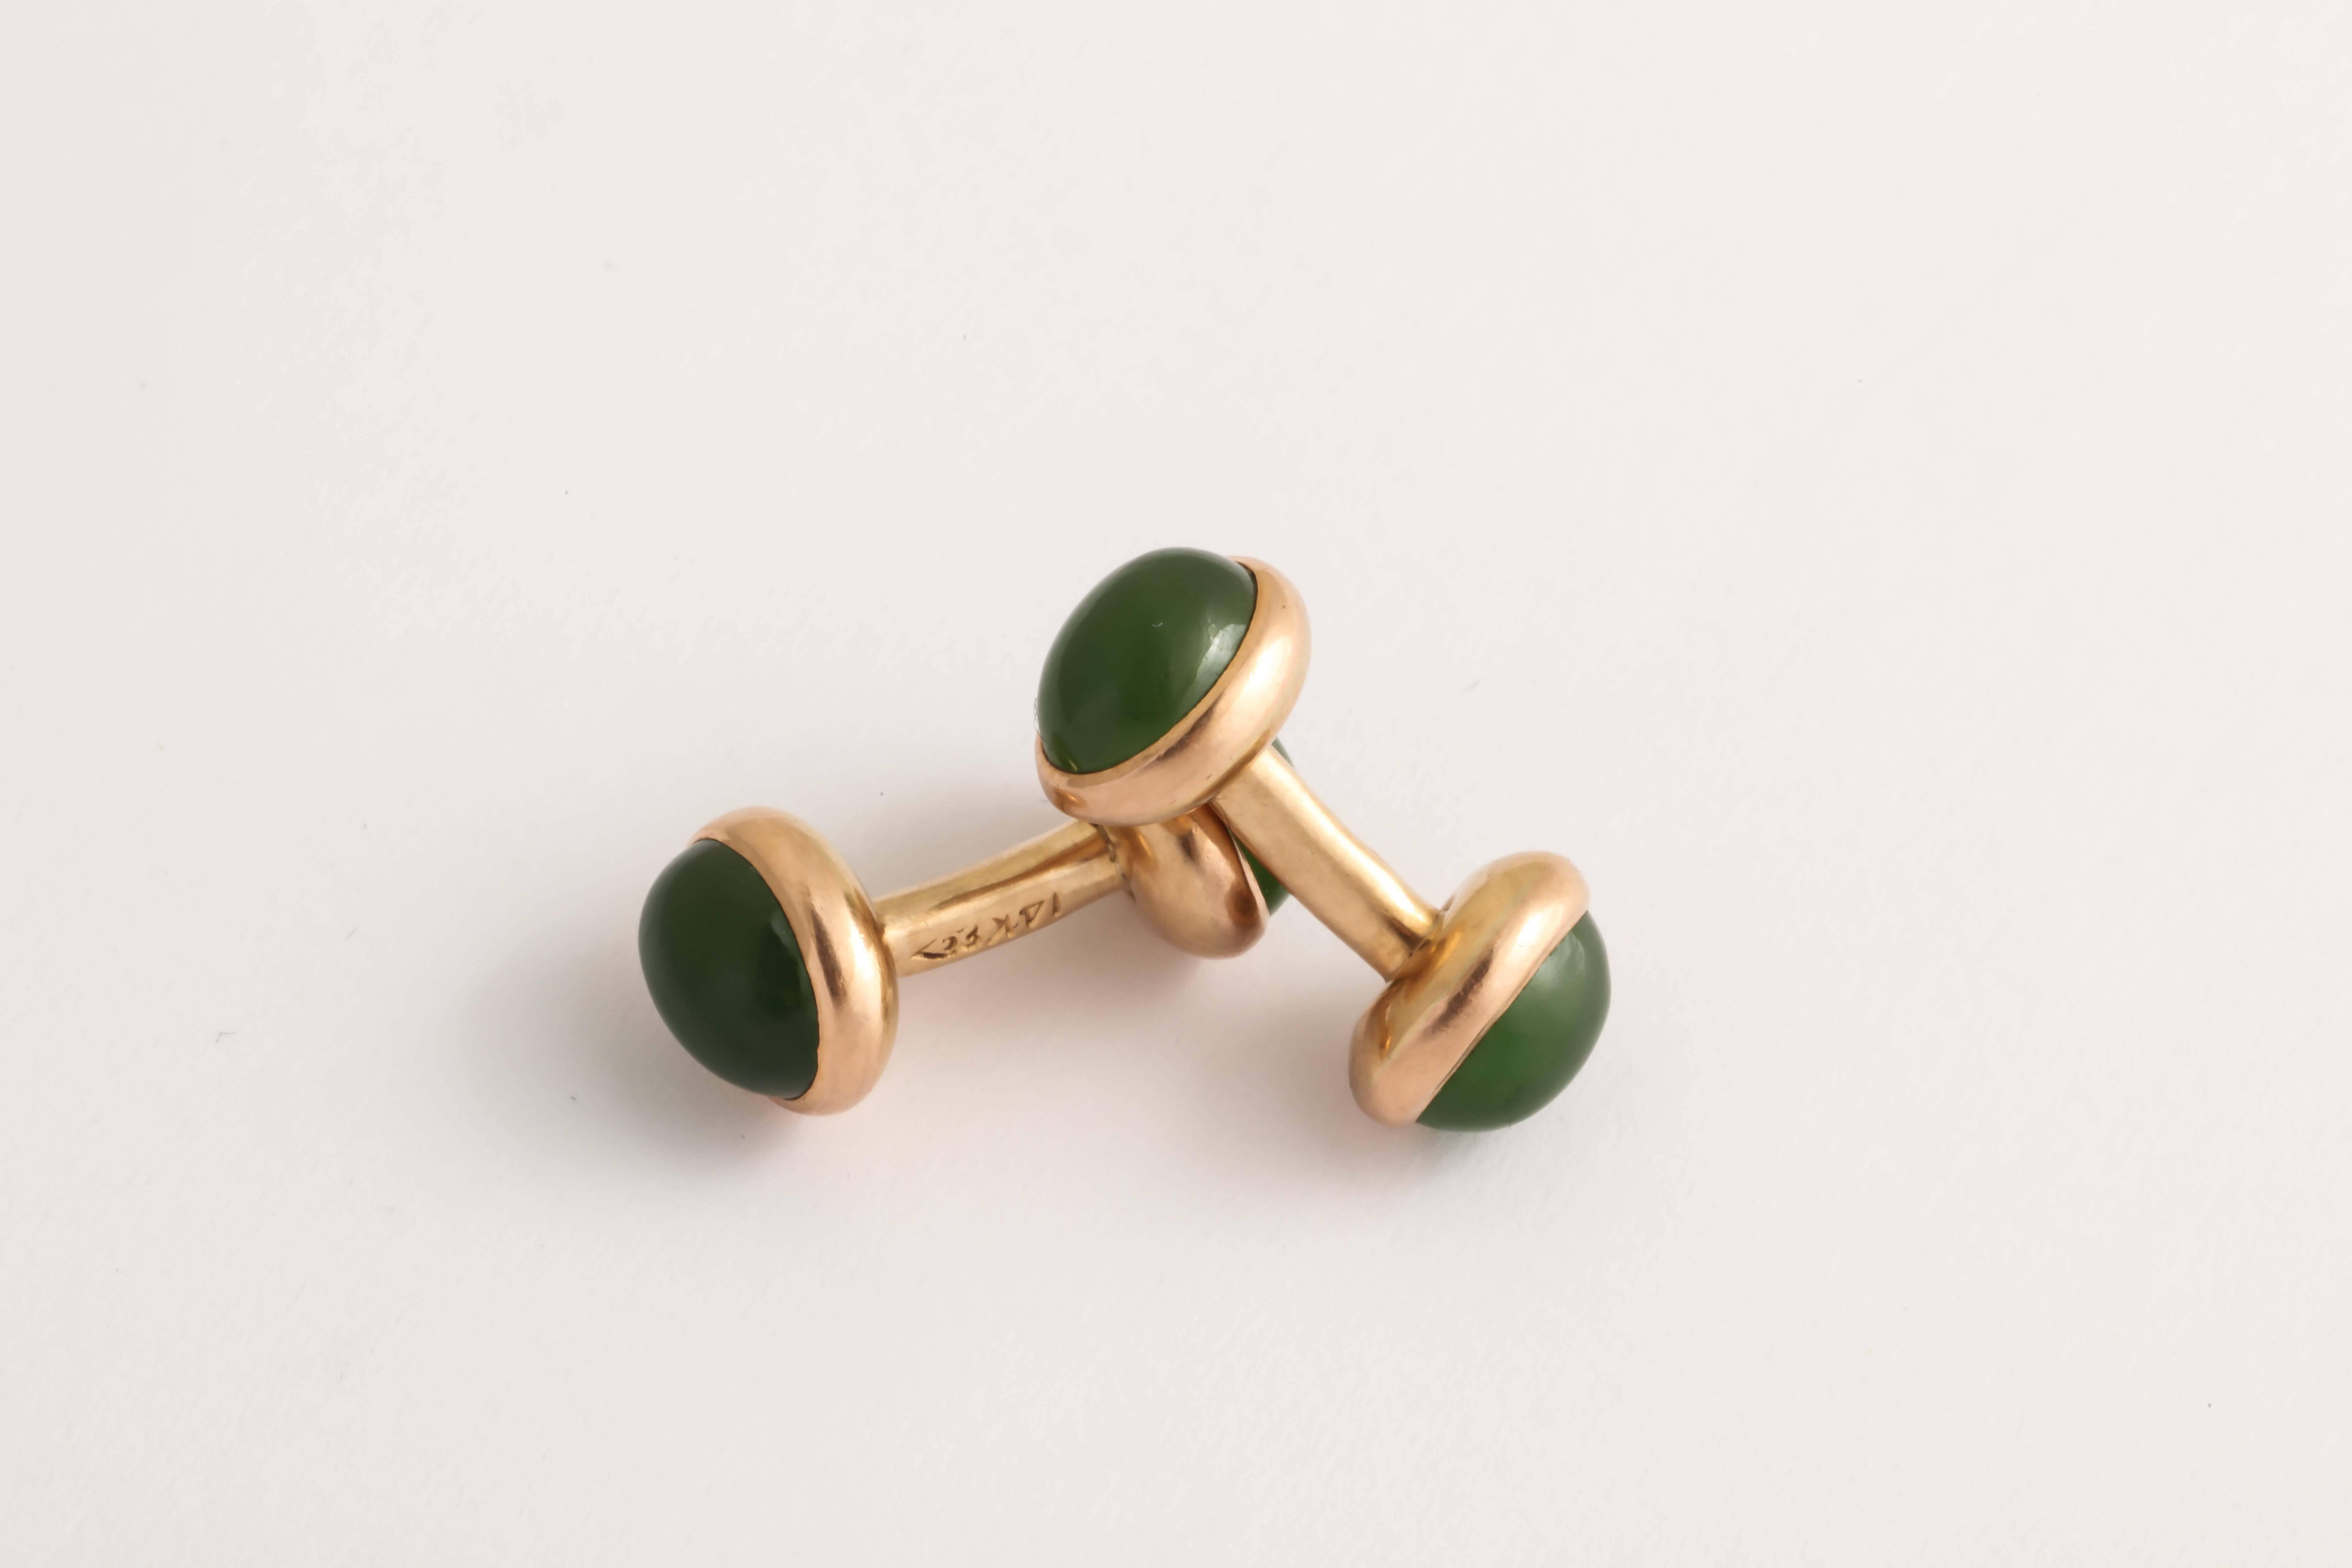 These small cuffllinks have jade which measures 8mm X 6mm on each side.
Impressed 14k/ Hallmark cachet.
